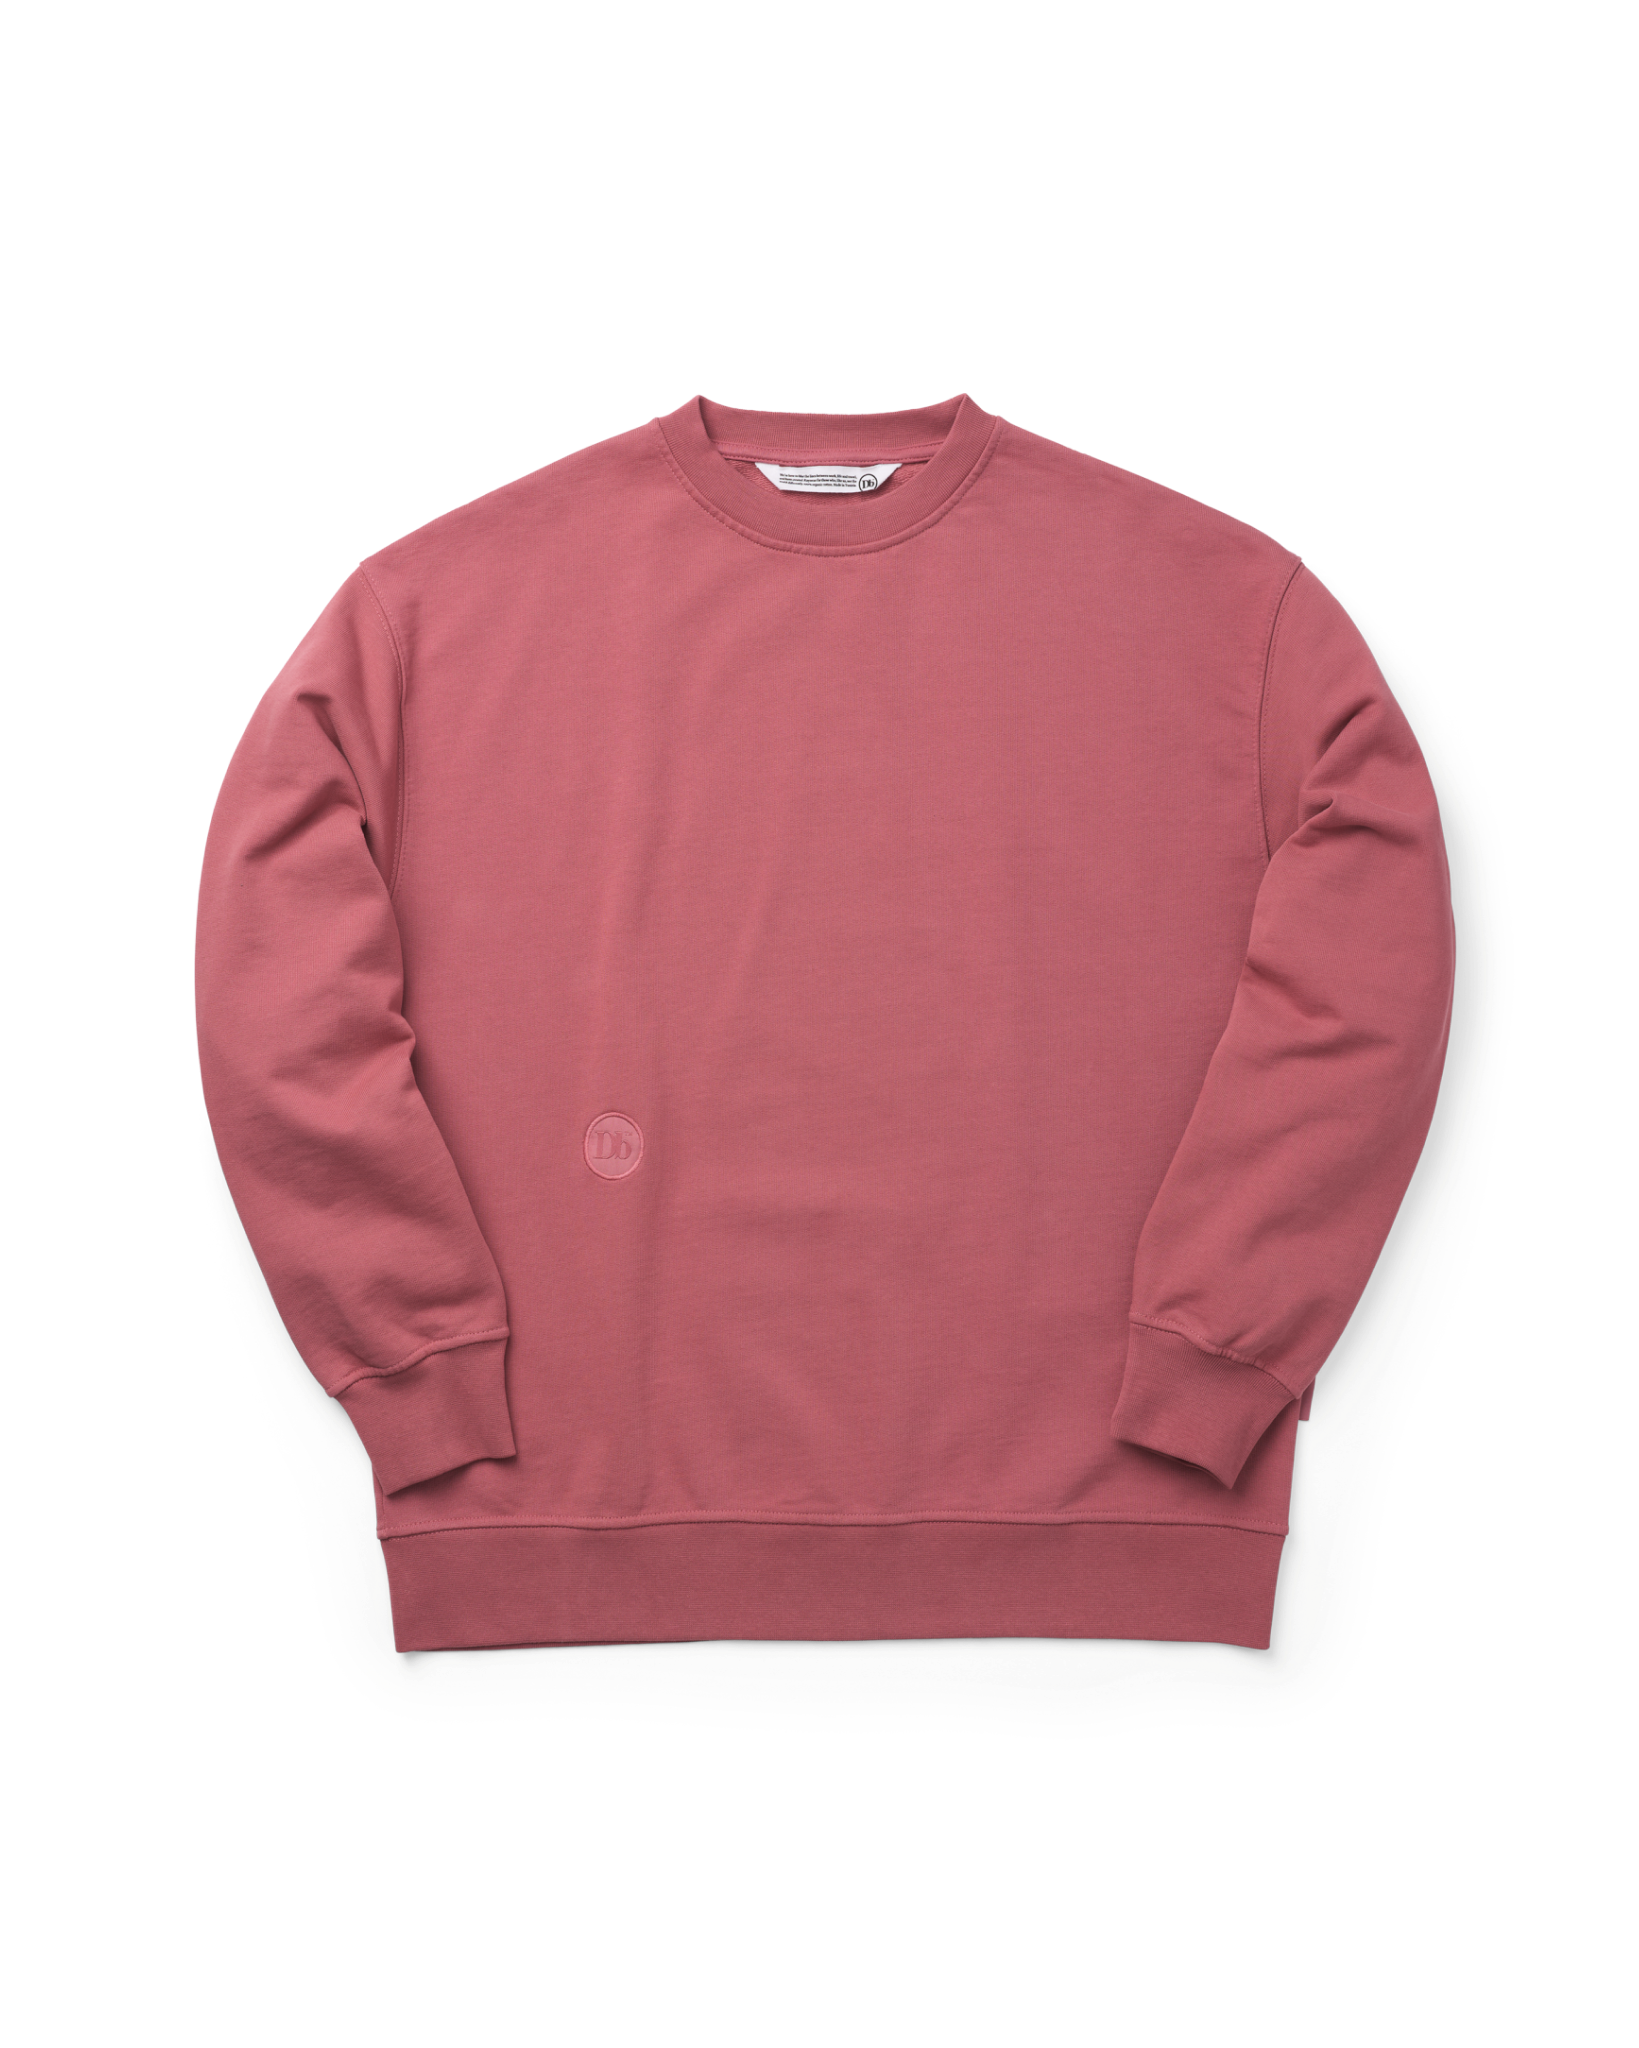 Anywear Crewneck Sunbleached Red - L / Sunbleached Red